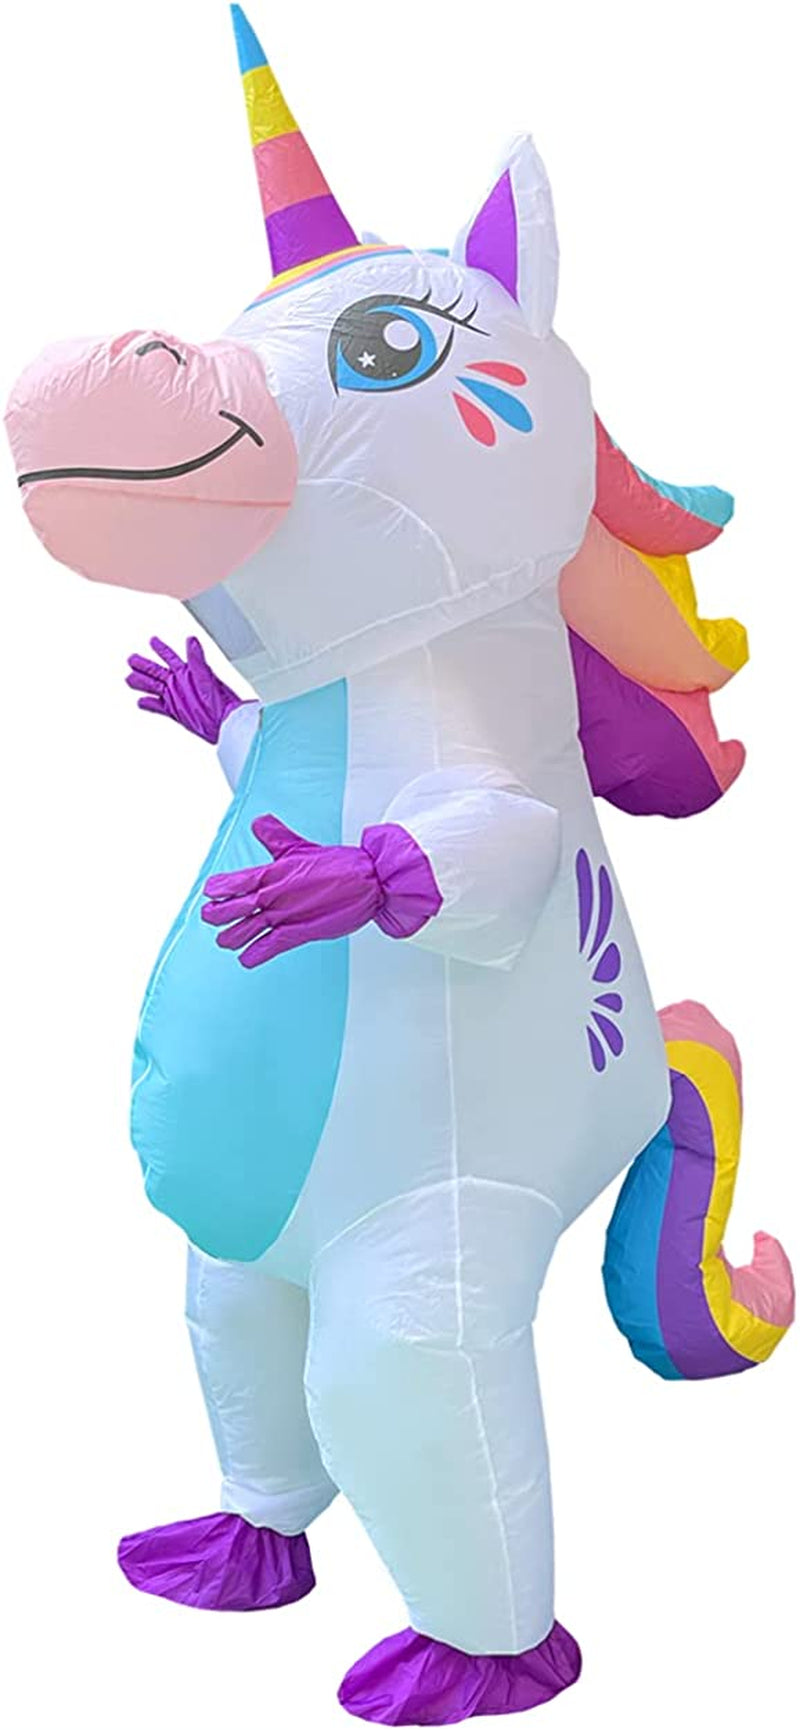 Gootus Unicorn Inflatable Costume for Adult - Full Body Blow up Halloween Inflatable Costume for Halloween Party Cosplay  Gootus   